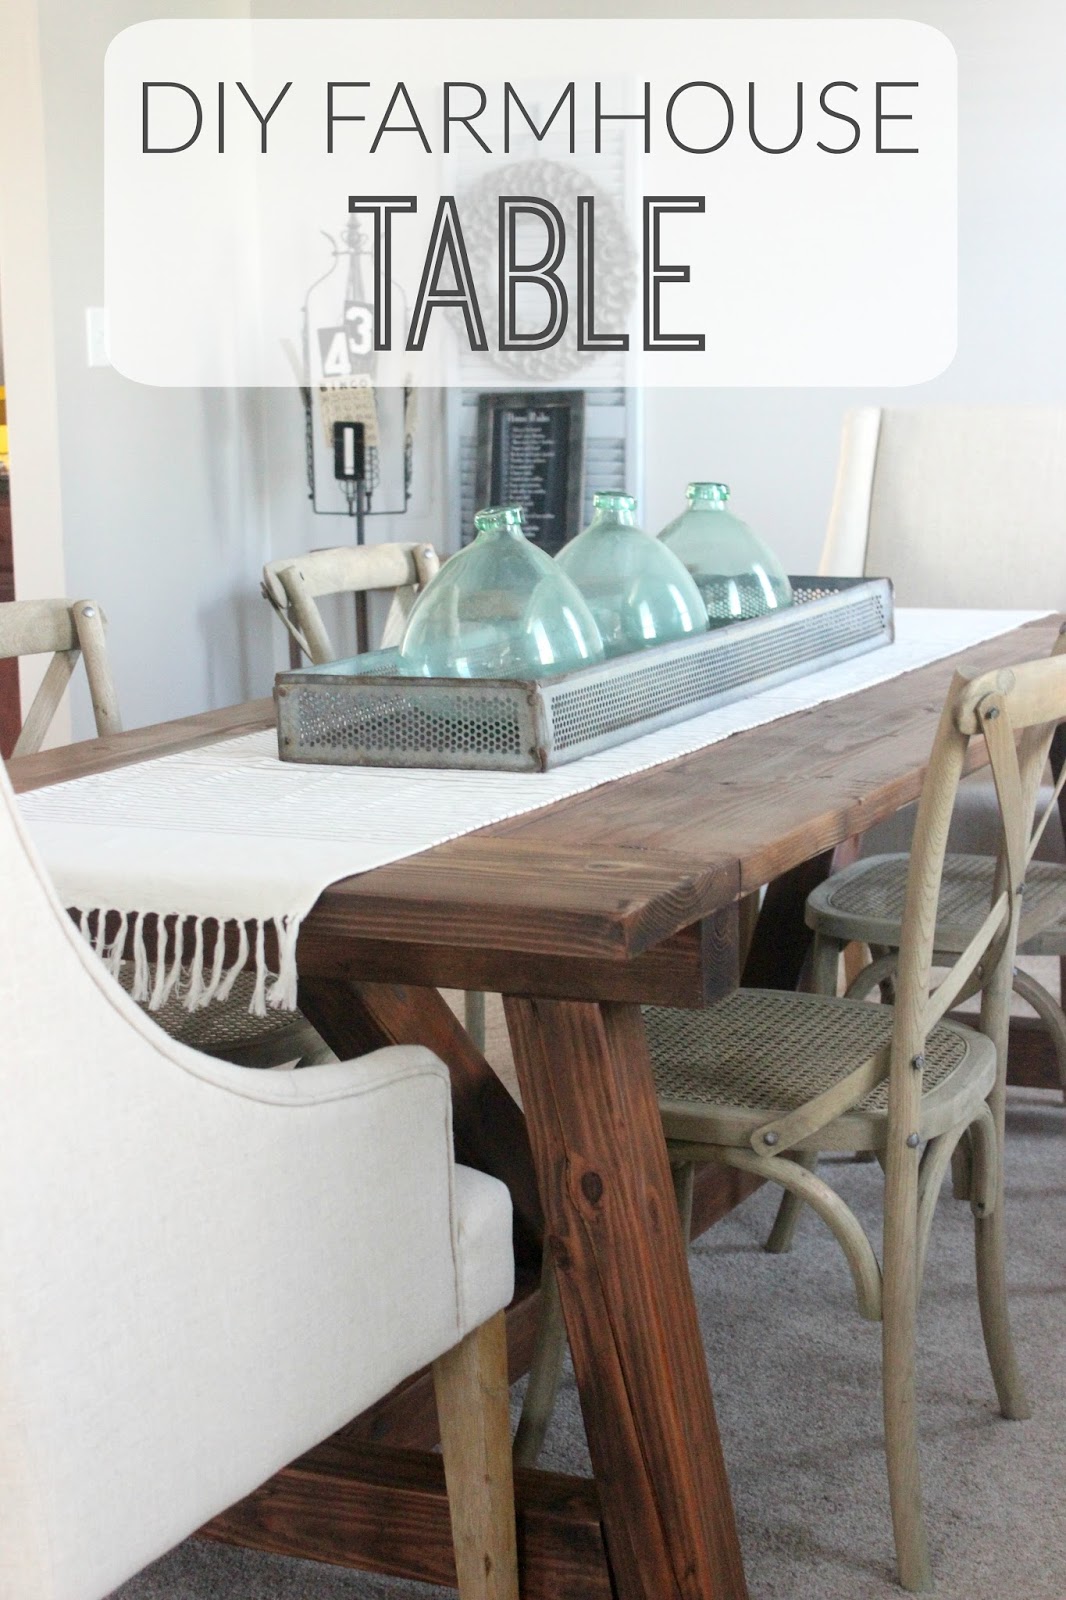 DIY farmhouse table inspired by Restoration Hardware.